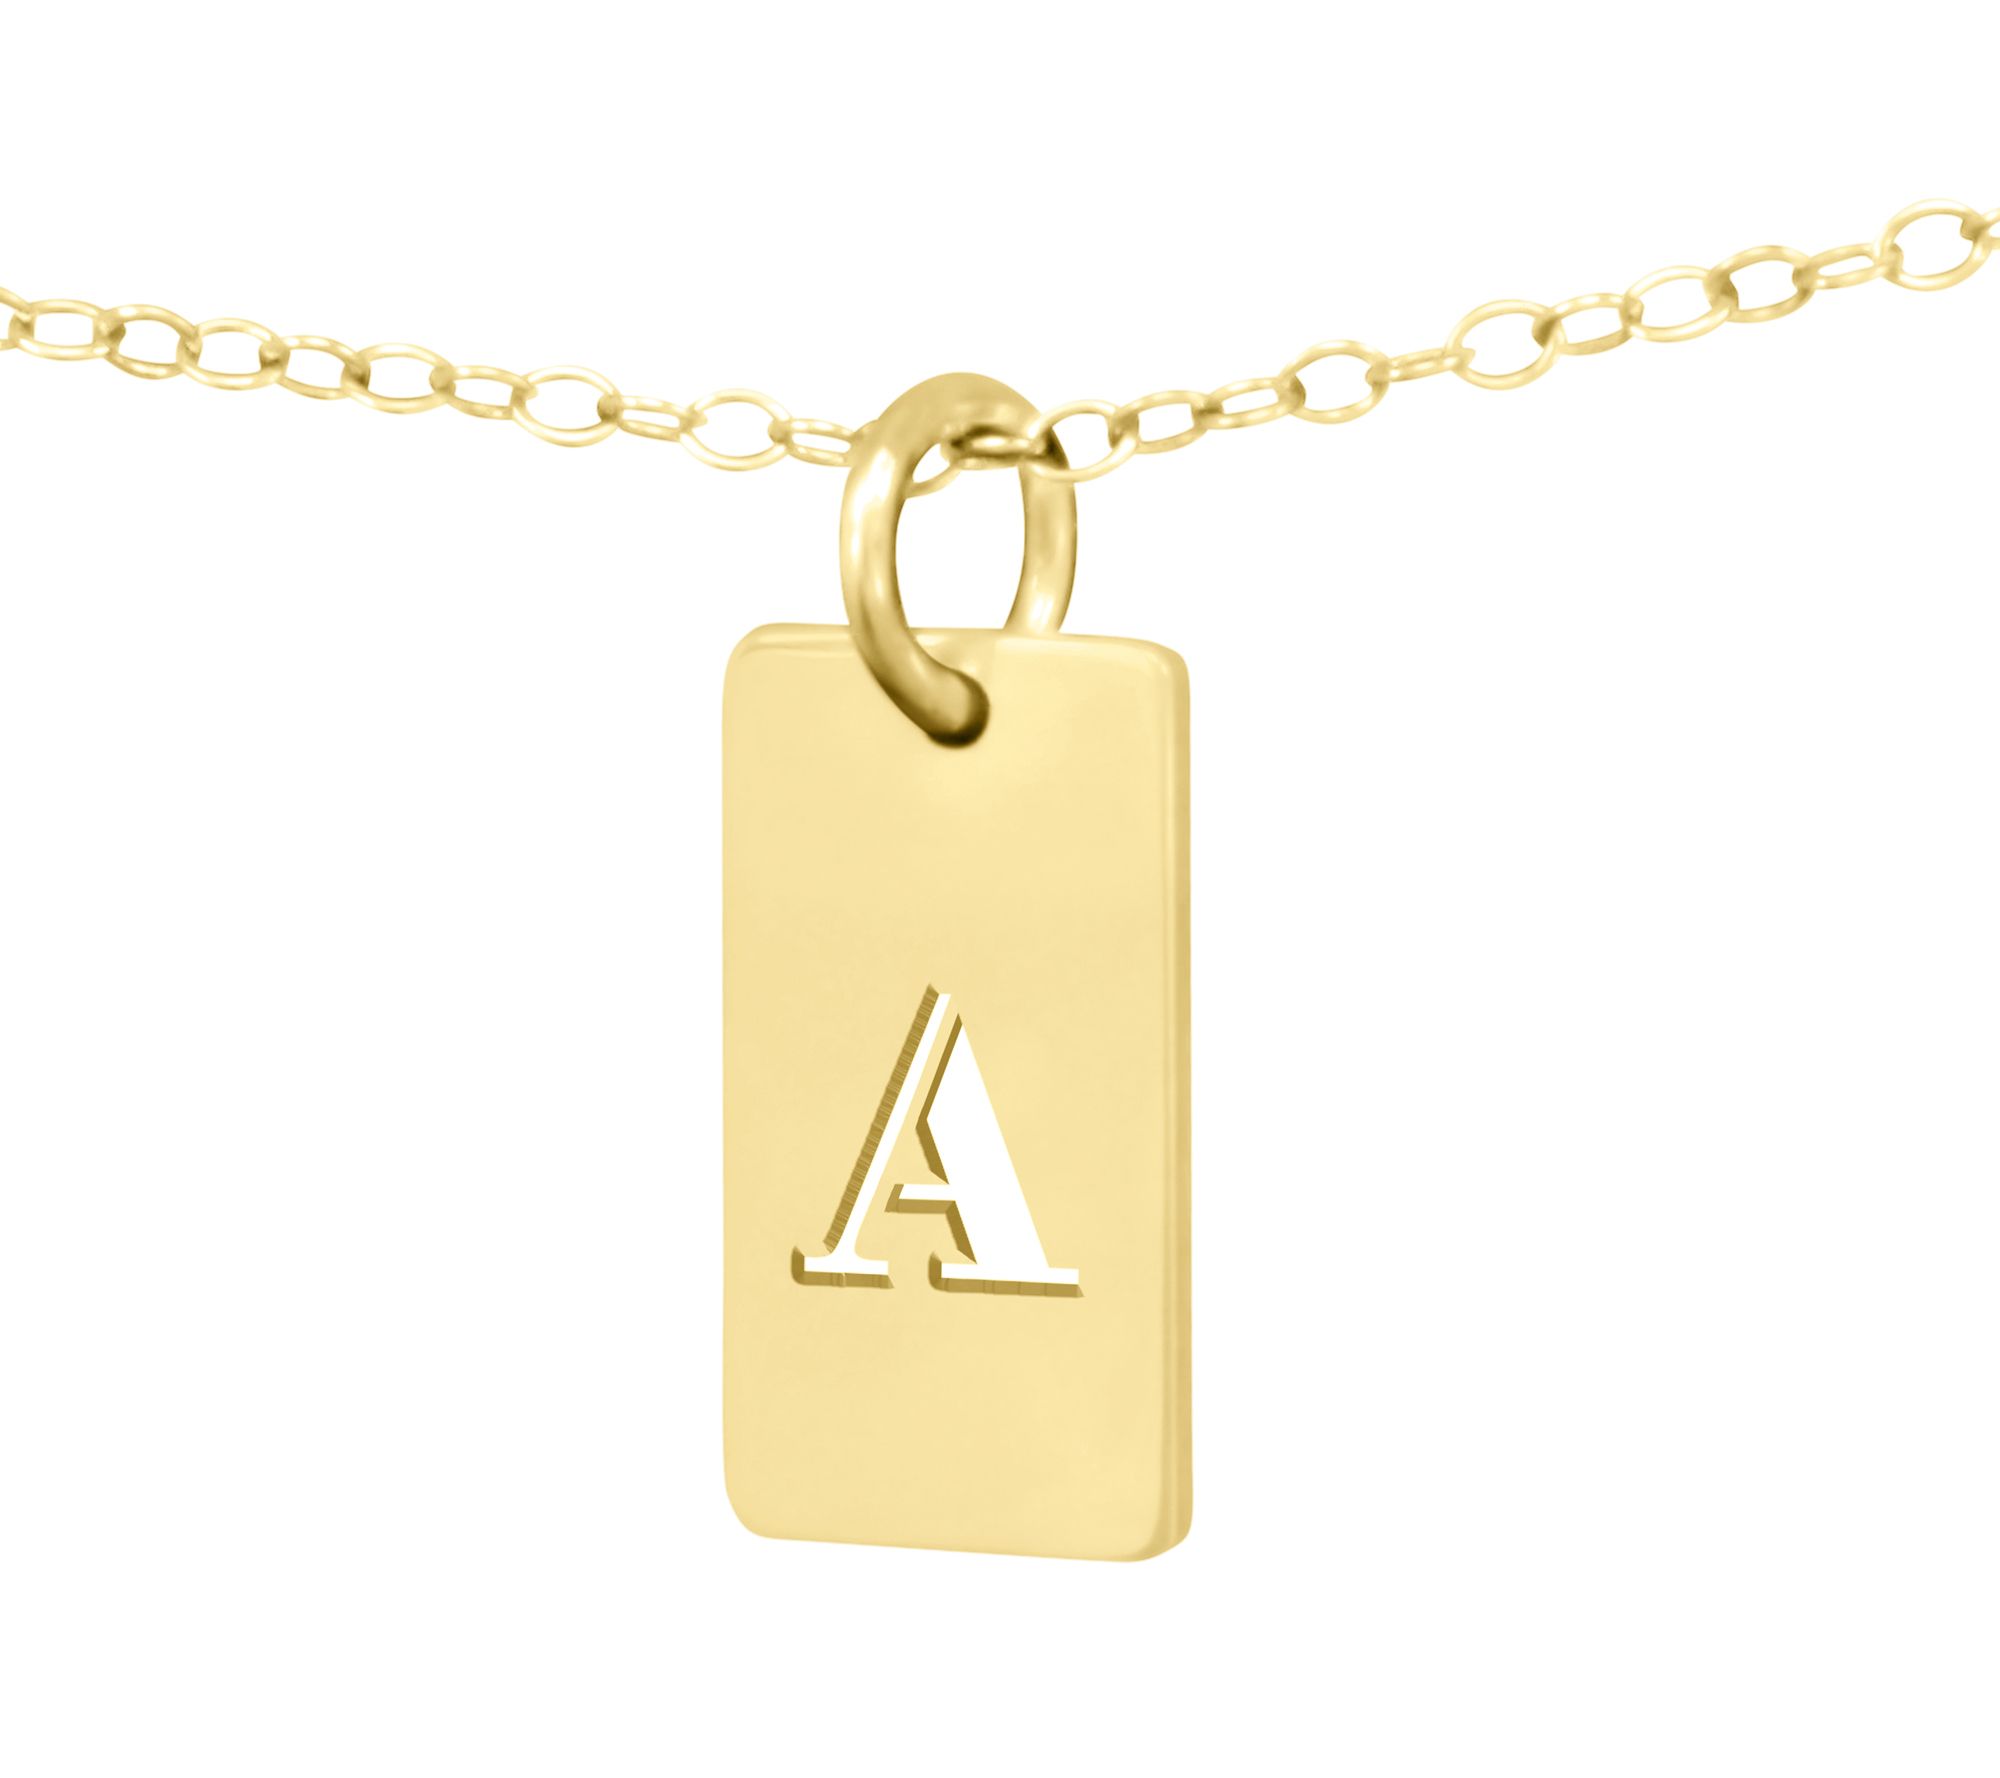 AJ's Collection Personalized Gold Filled Initial Necklace. Customize 2 Gold Filled Charms with initials. Choice of Gold Plated Chain. Gift Idea for